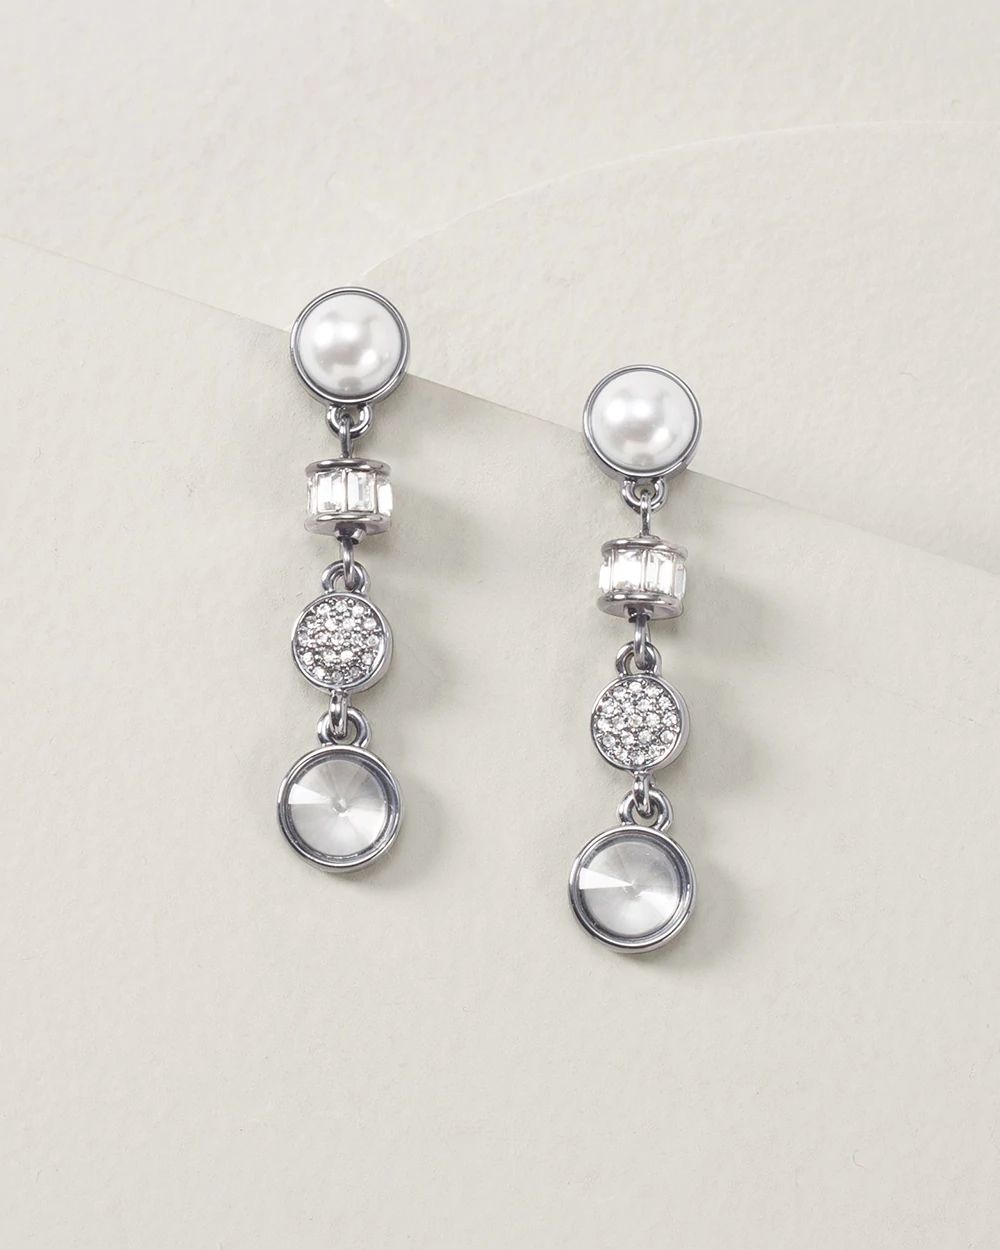 Pearl & Crystal Linear Earrings click to view larger image.